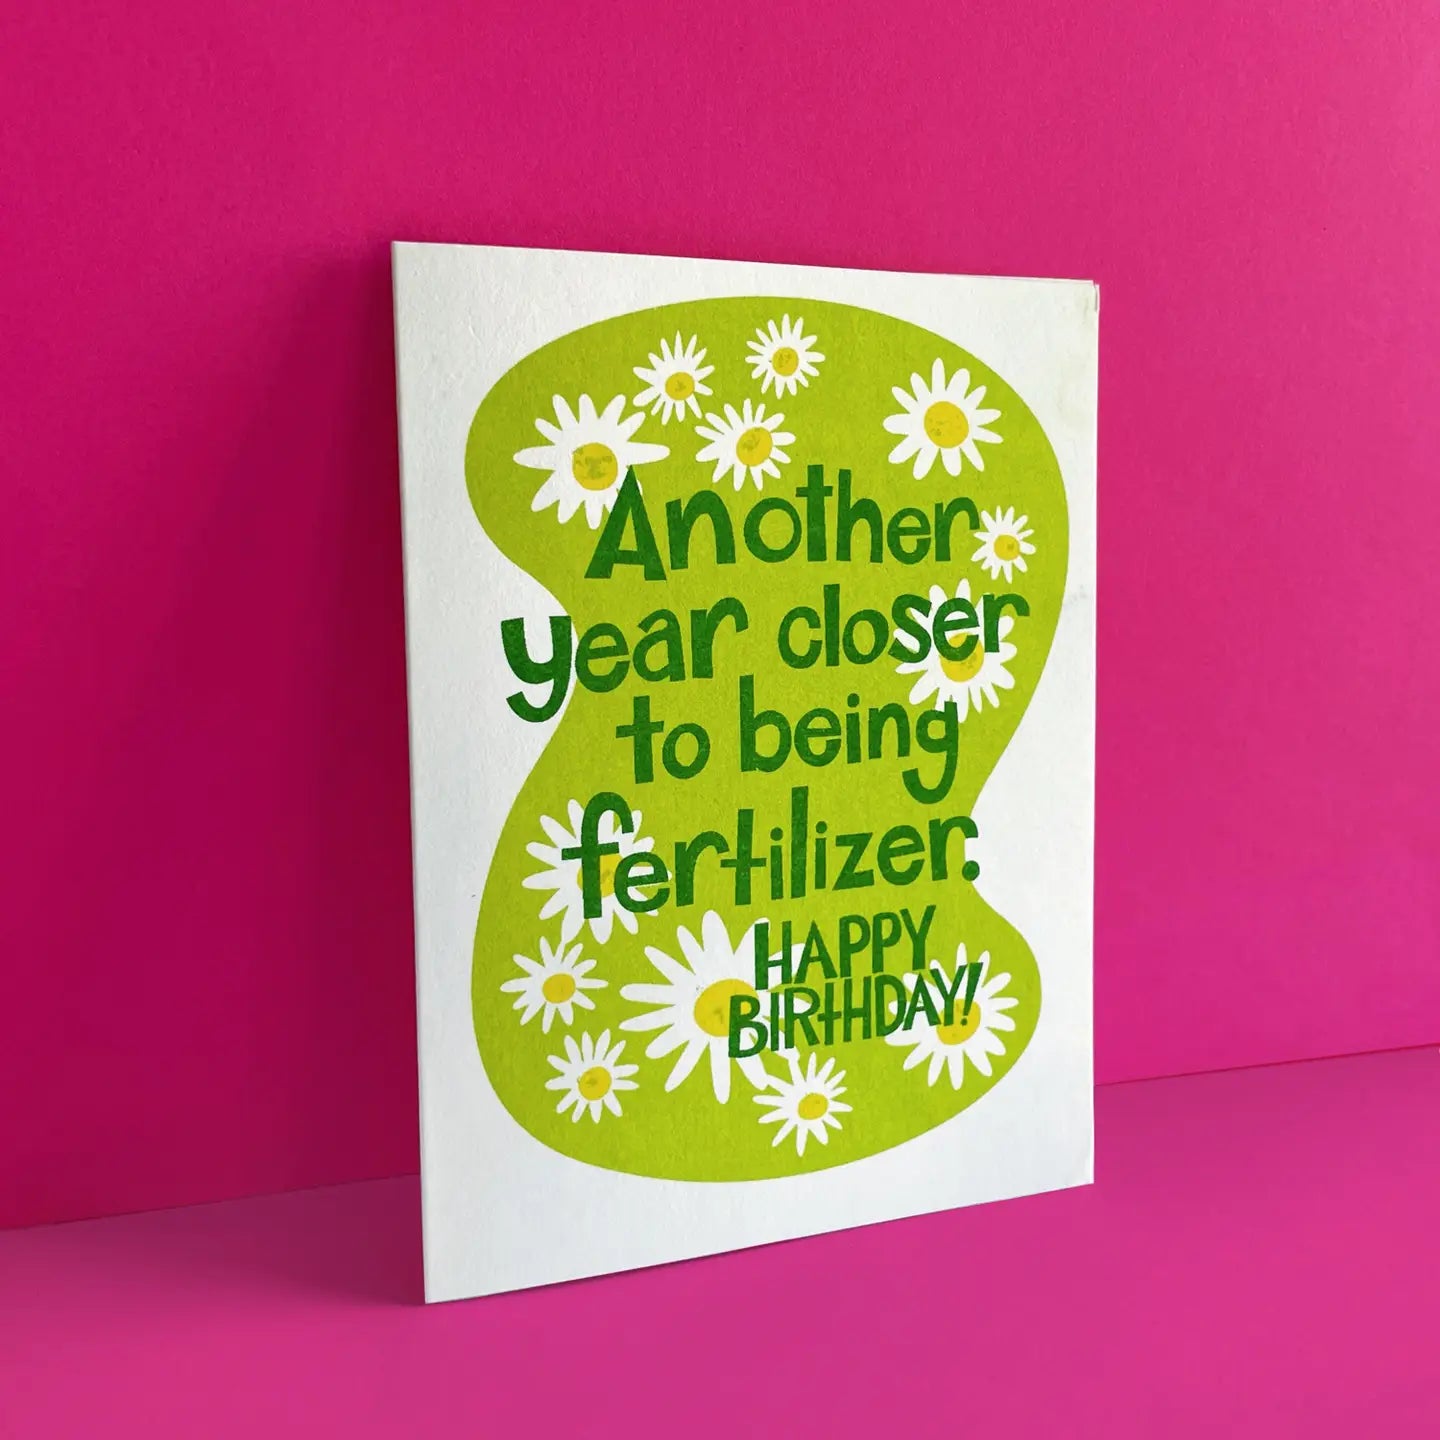 Greeting Cards in Spanish & English by Pier Six Press